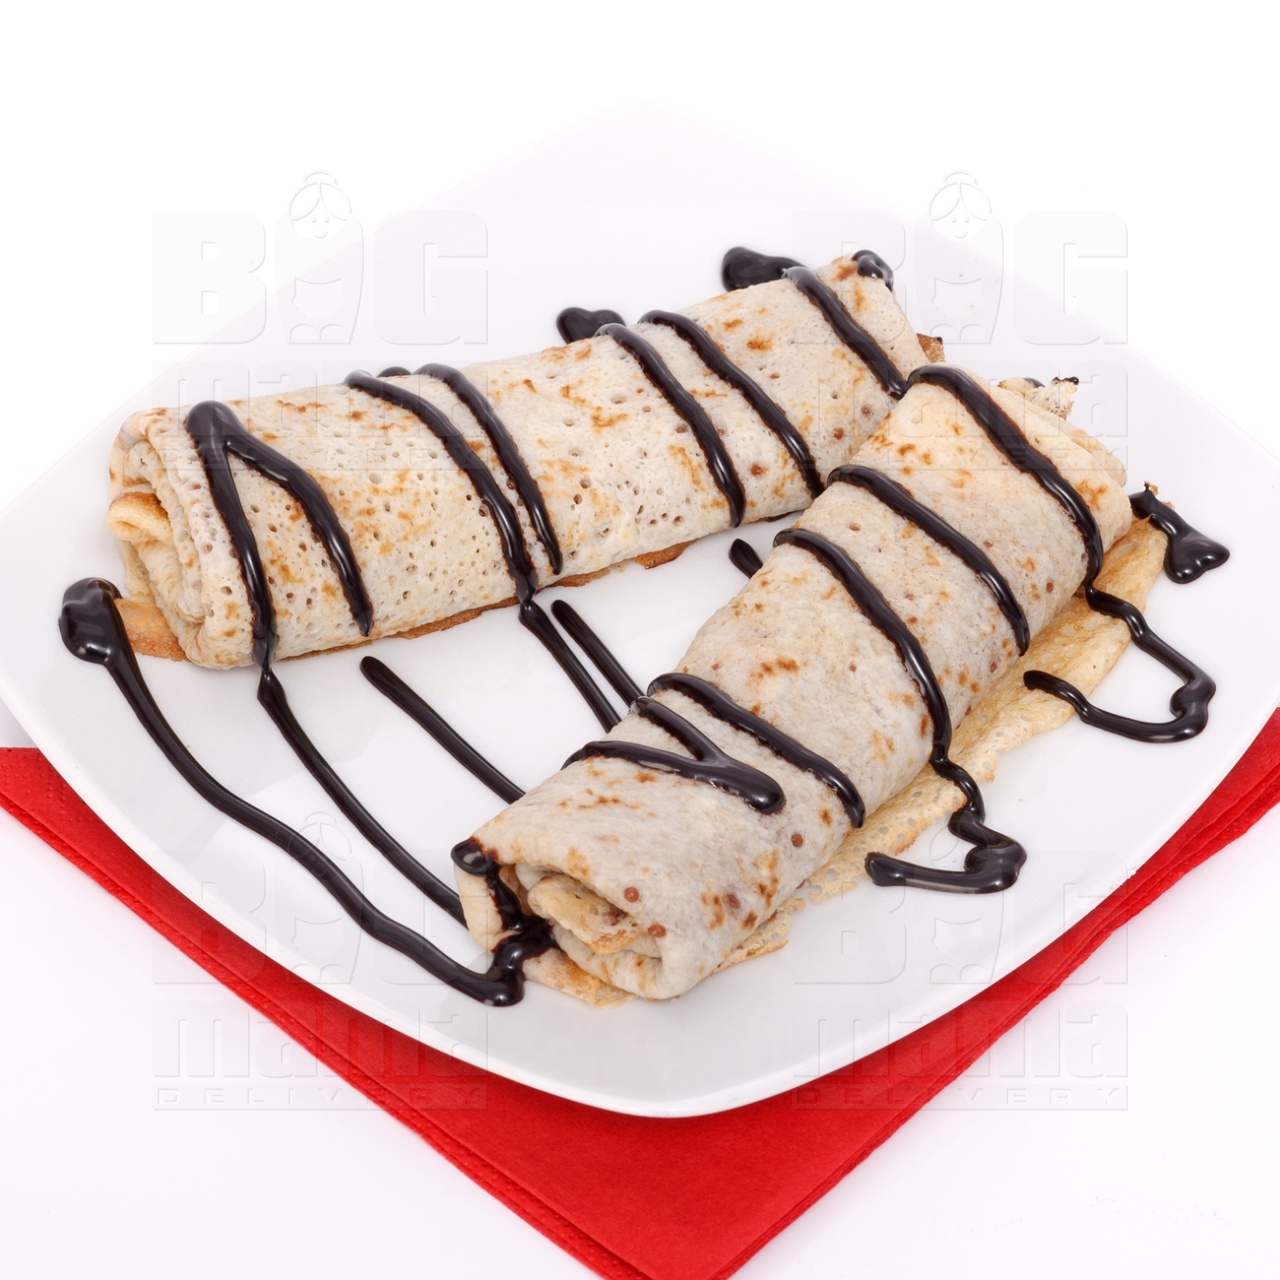 Product #171 image - Pancakes with chocolate, half portion